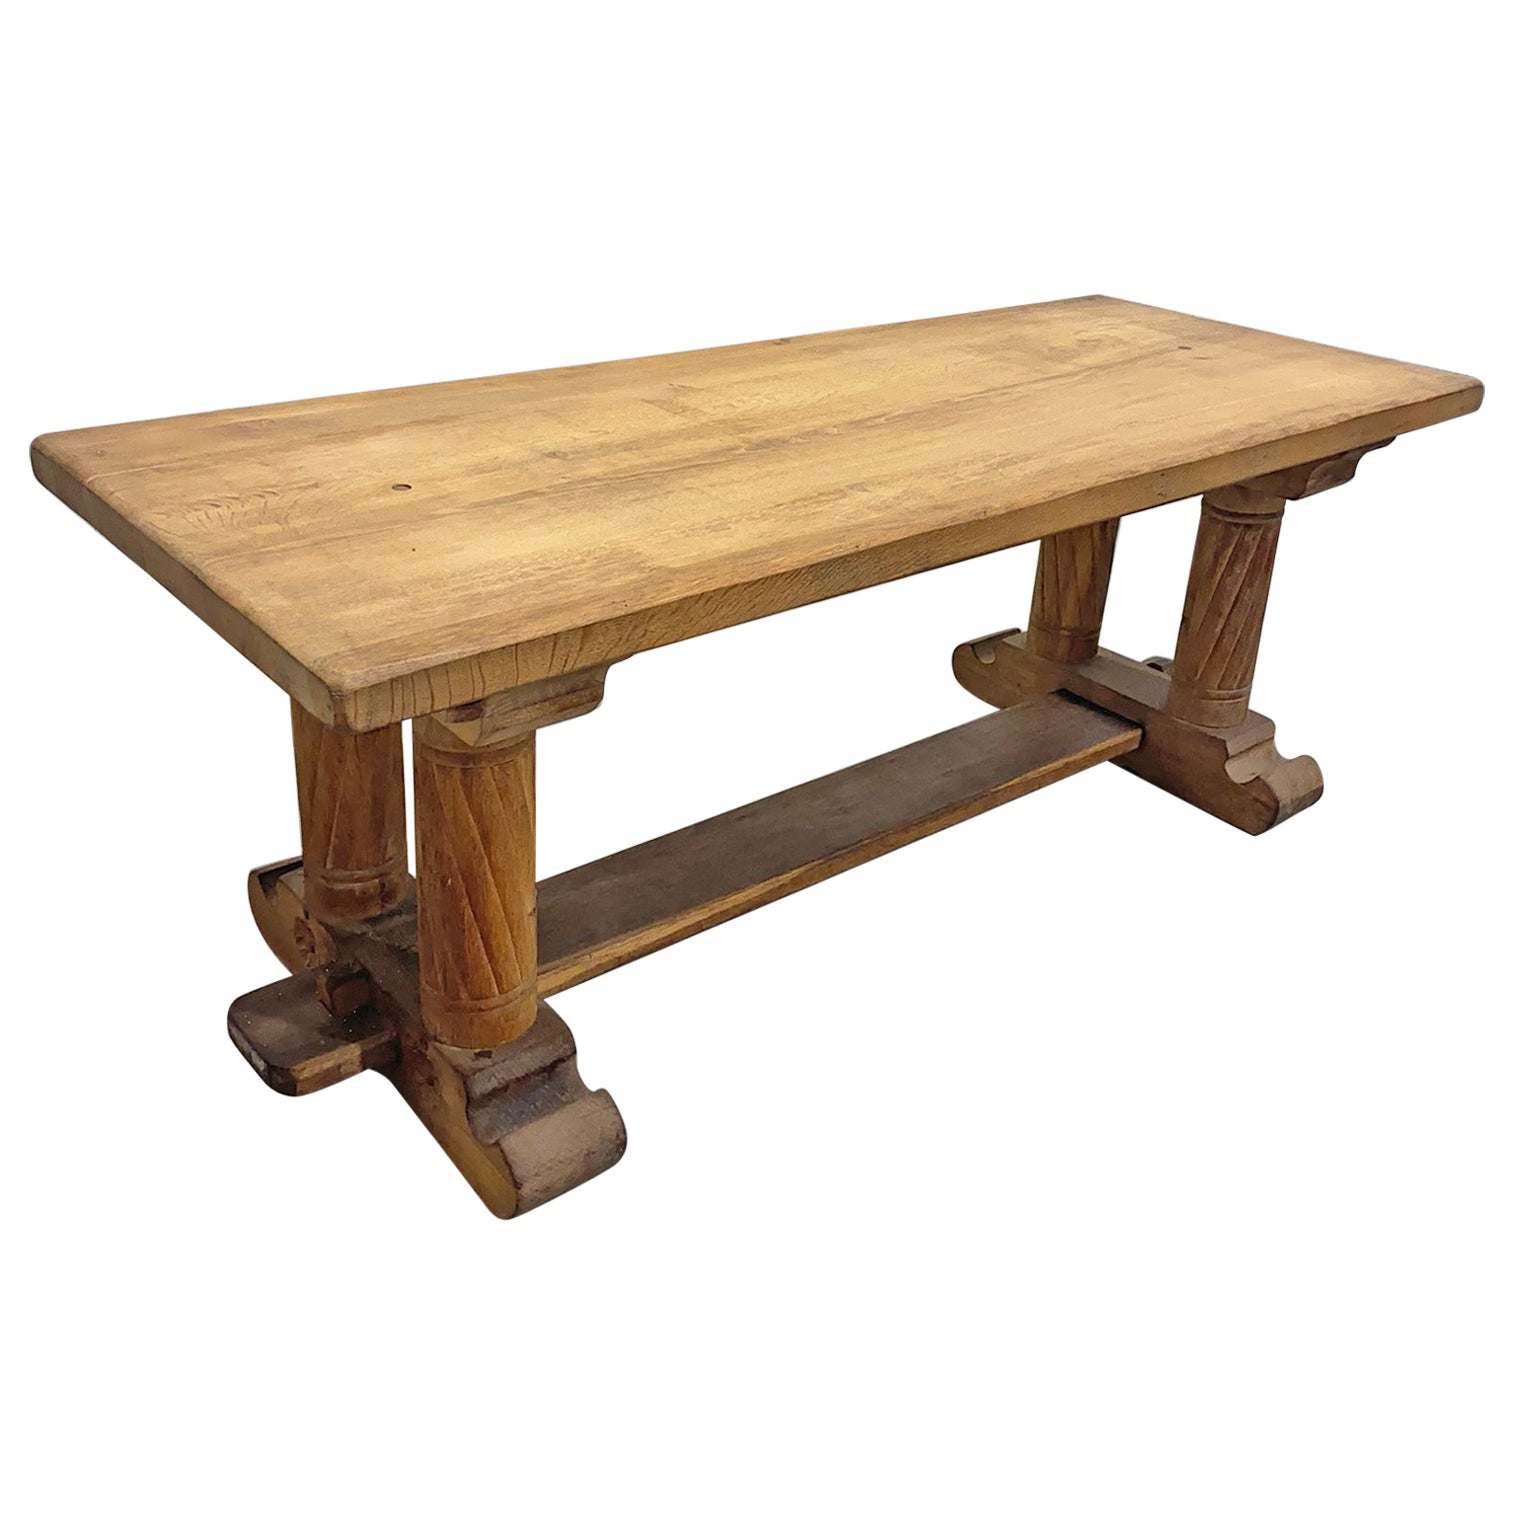 Neo Gothic Style Table in Solid Oak, Assembled by Keys, Disassembles Completely For Sale